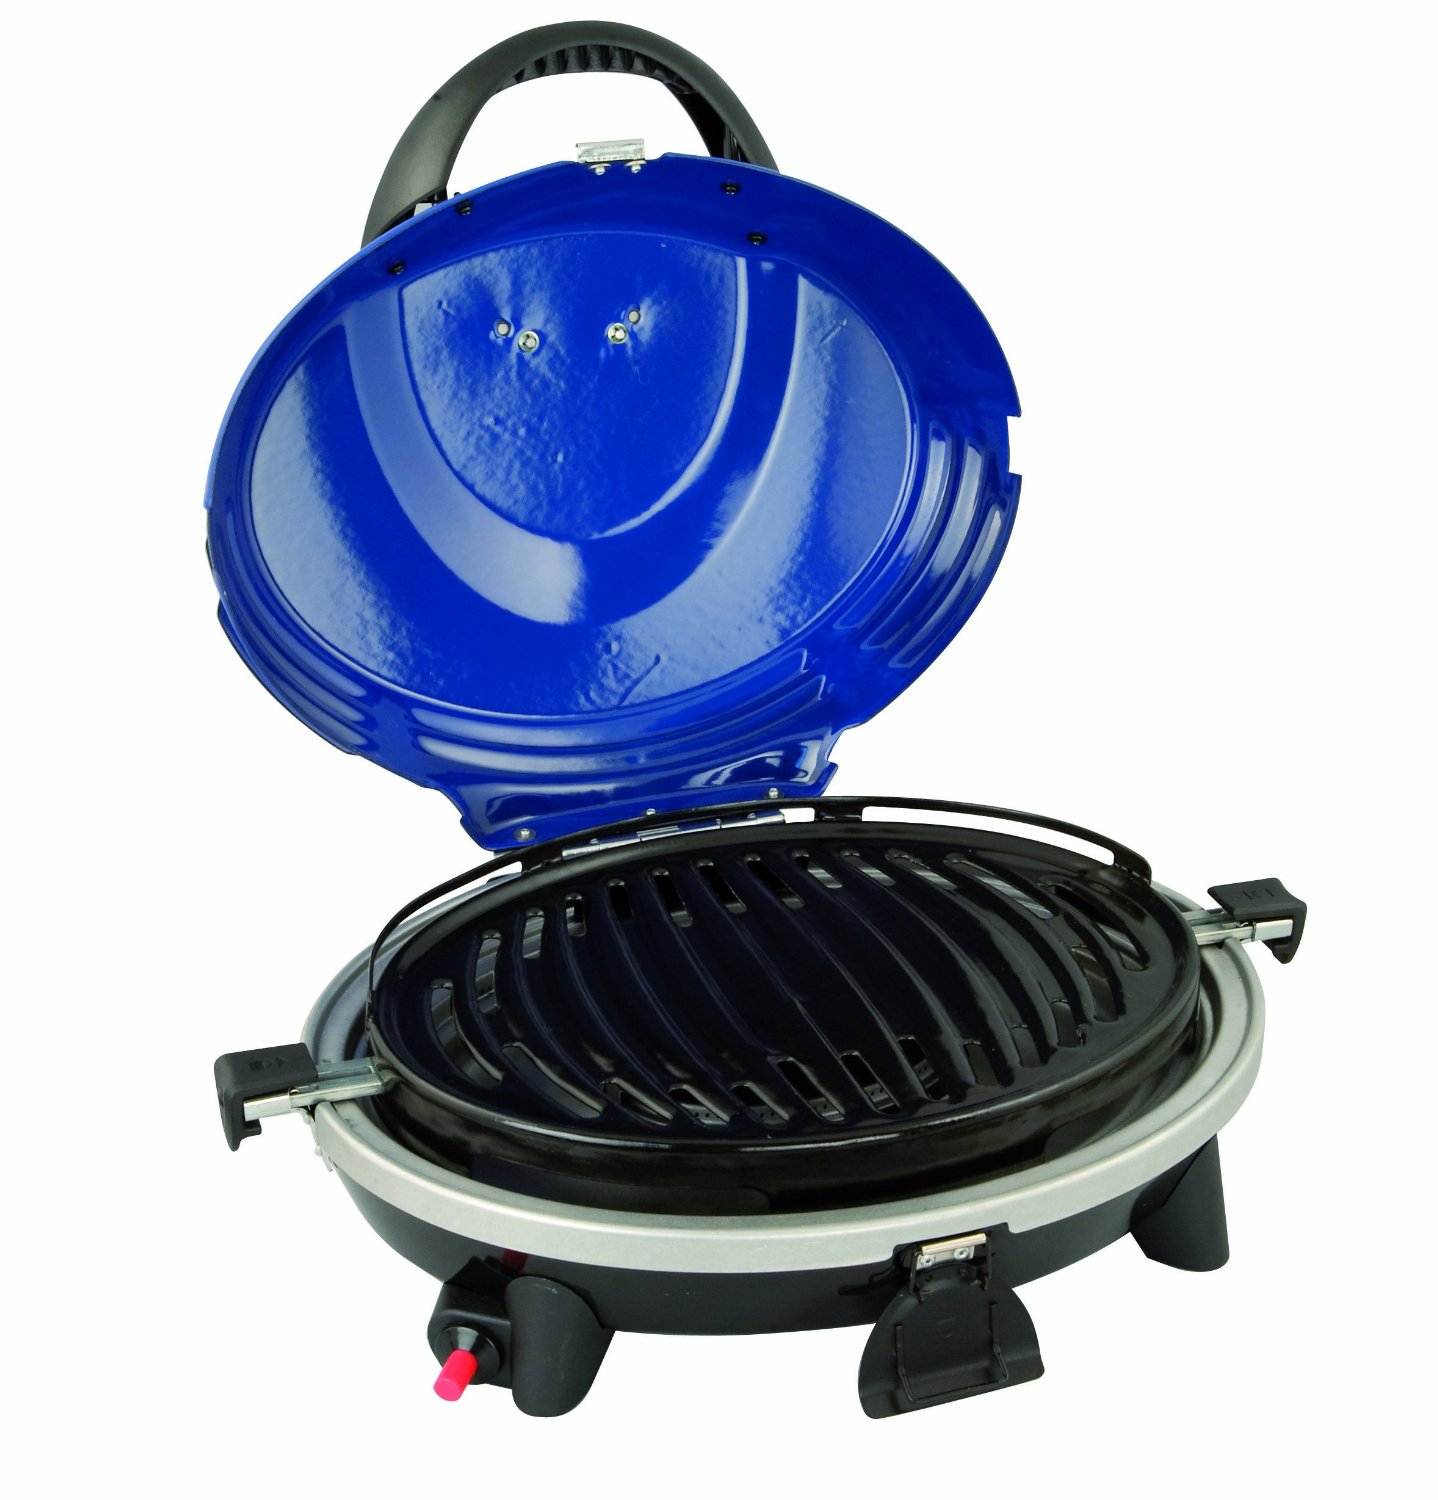 Campingaz 3in1 Gas Kugelgrill mit Grillrost